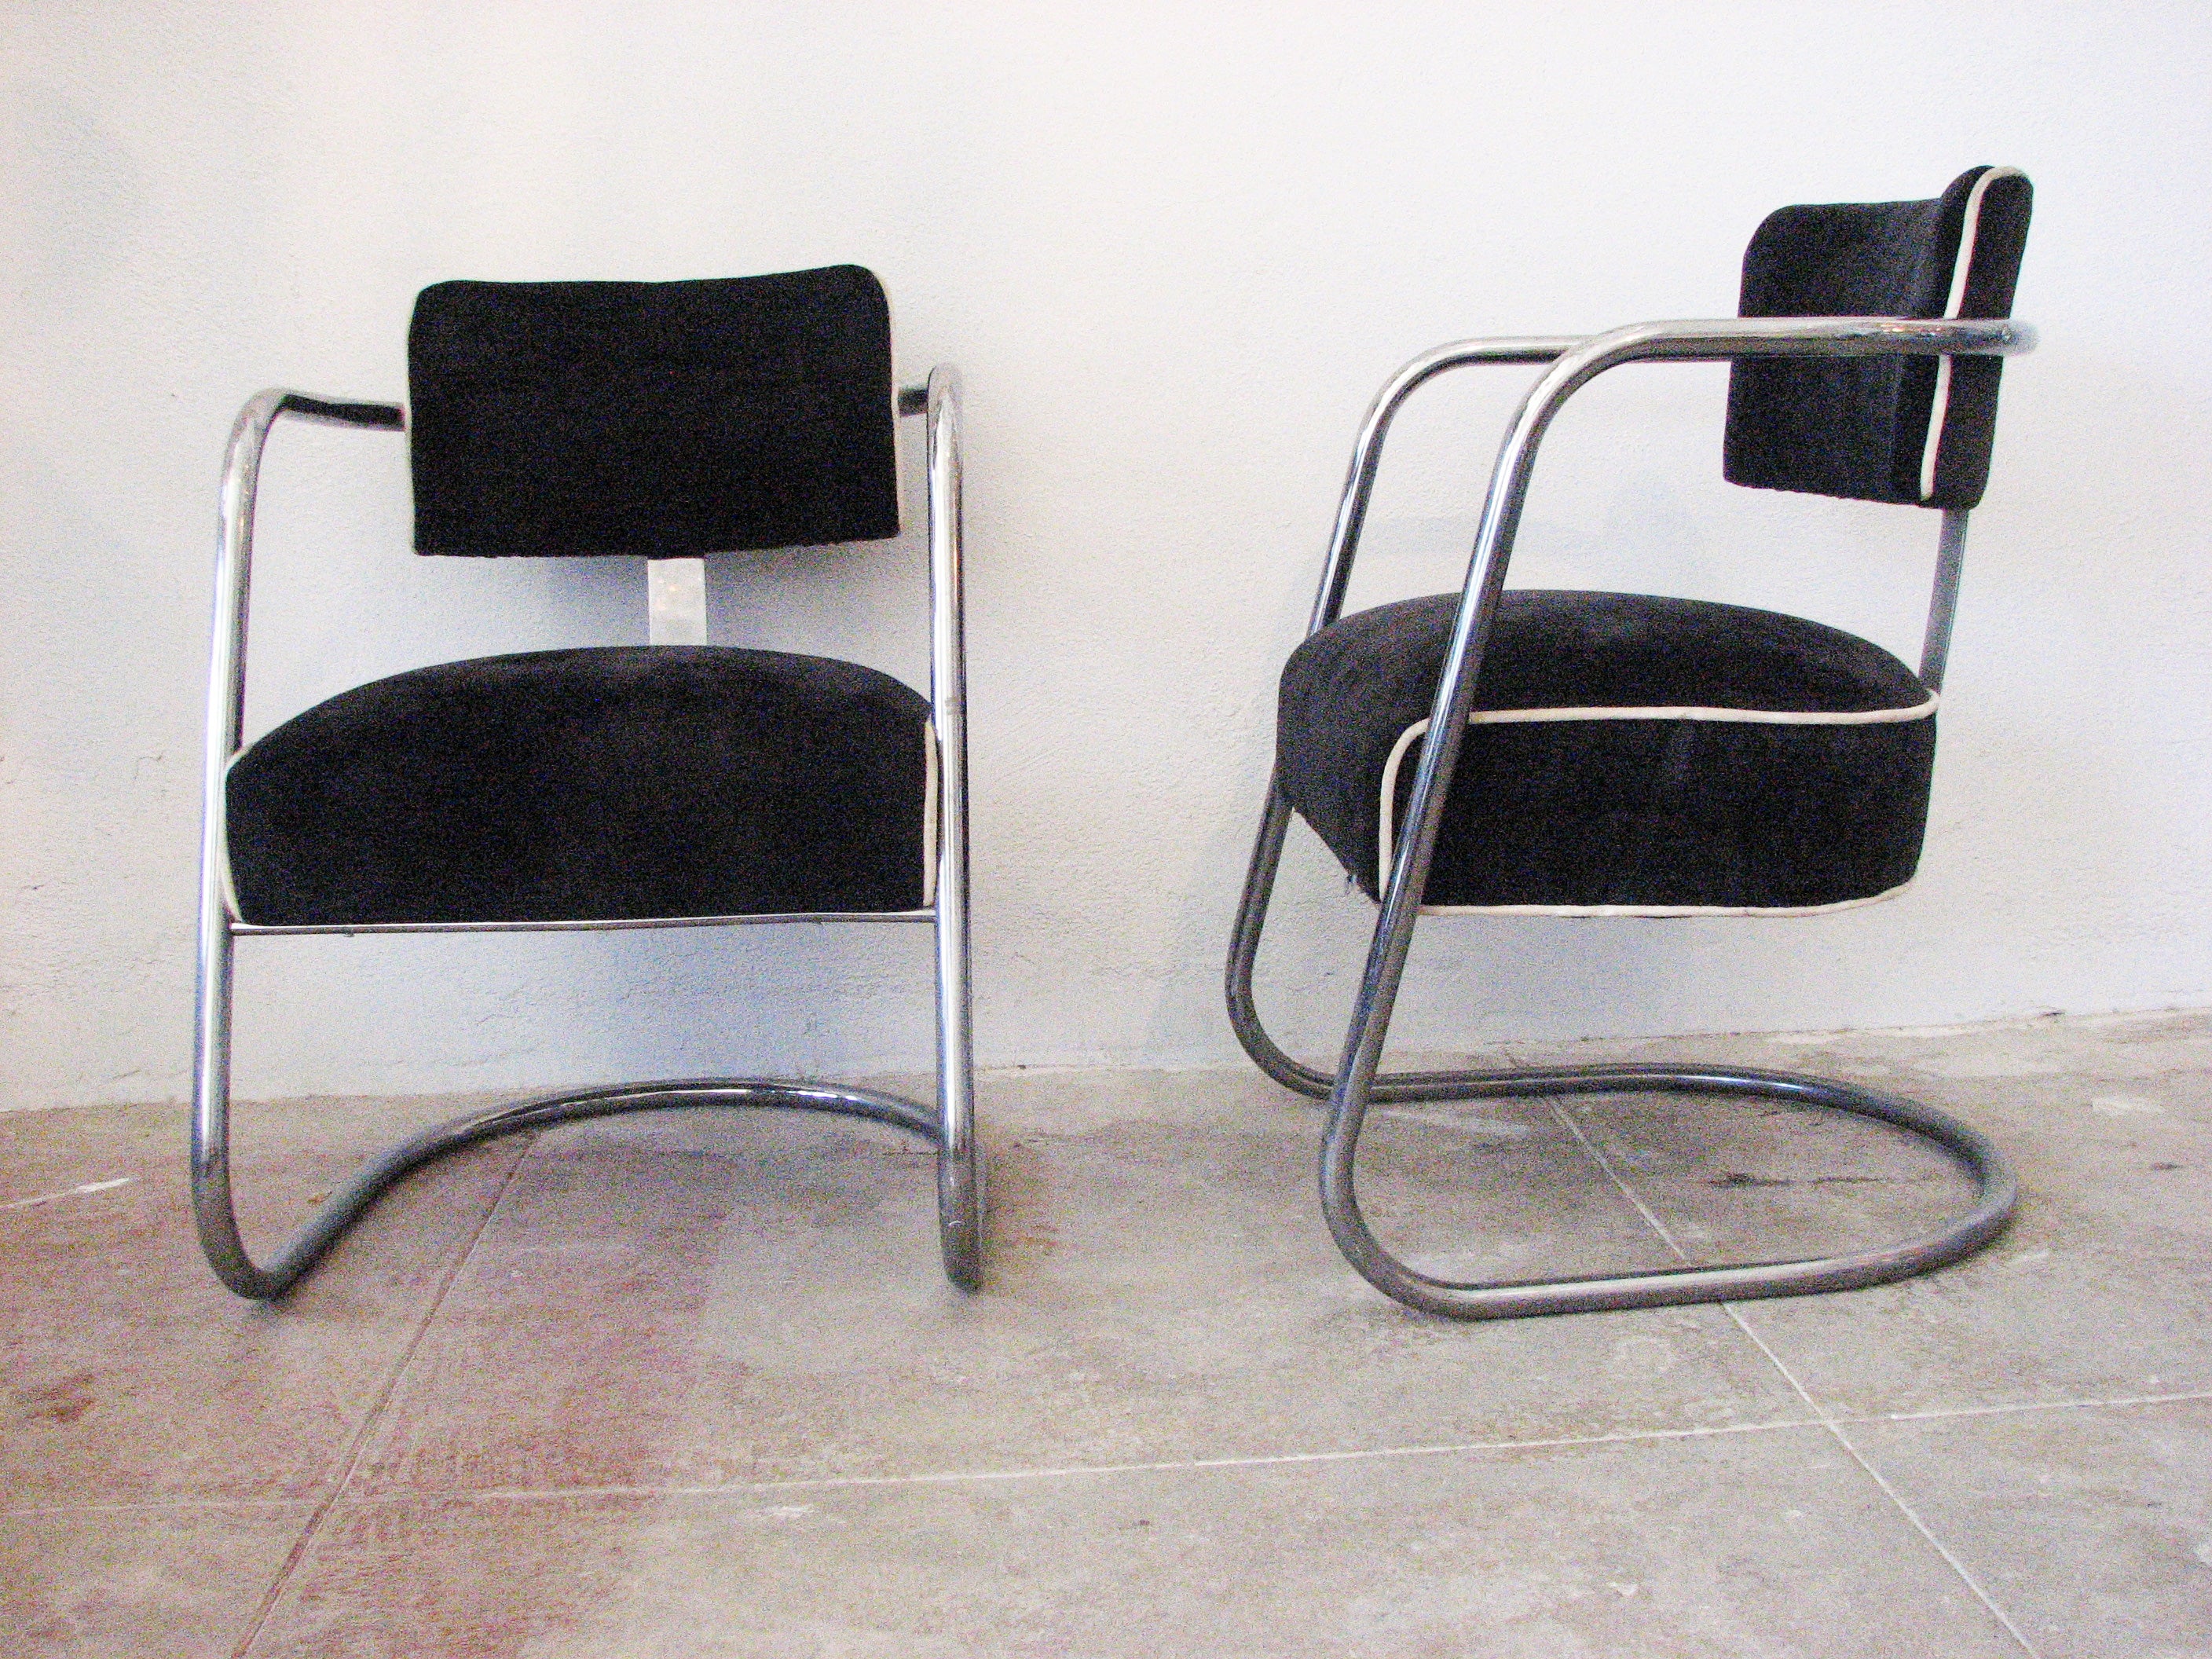 Cantilevered Art Deco Tubular Chrome Chairs by Jones Decorating Company